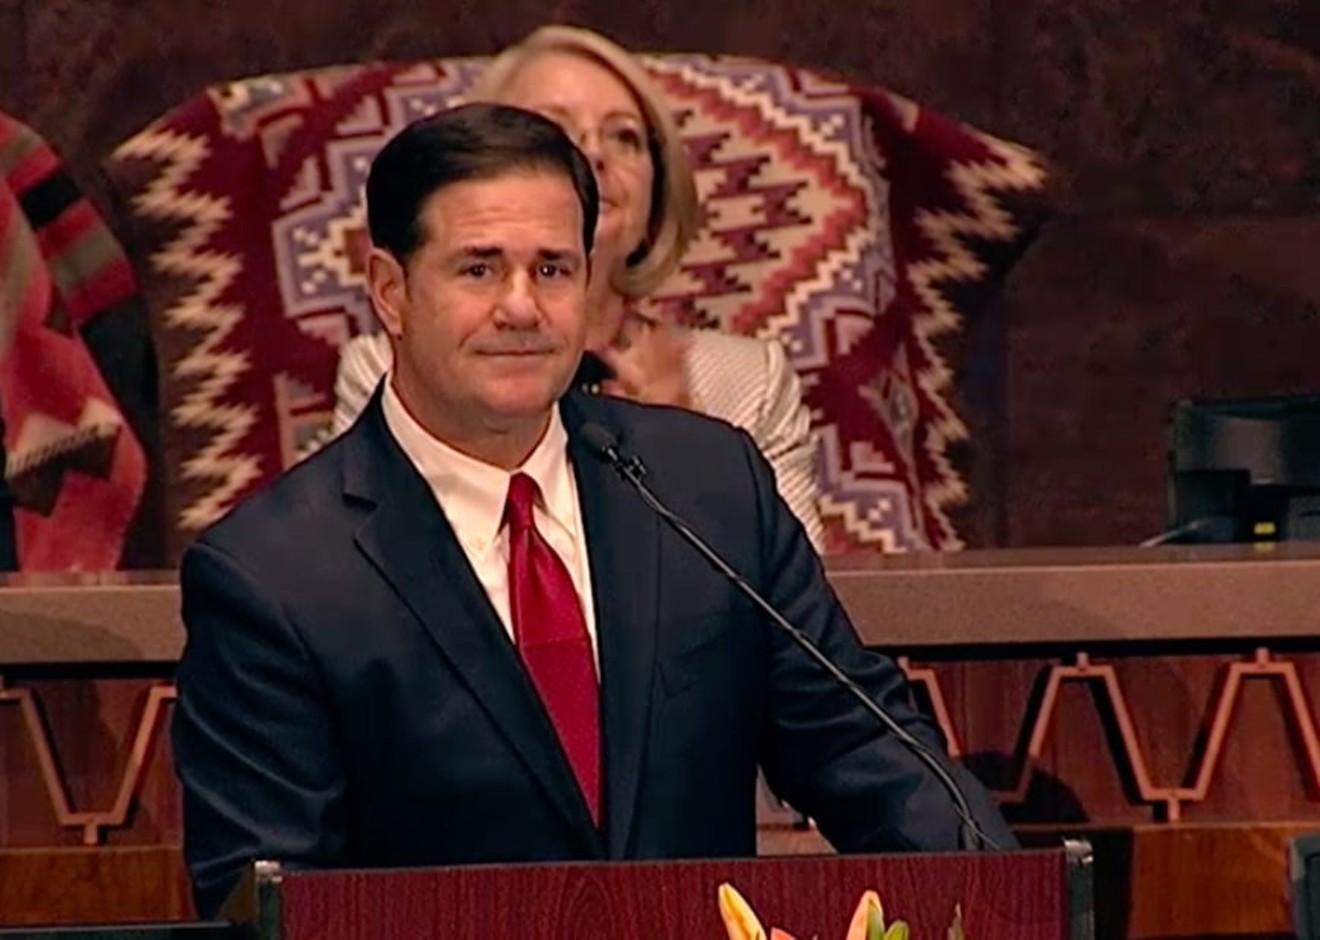 Governor Doug Ducey stands in front of Arizona lawmakers for his 2020 "State of the State" address.